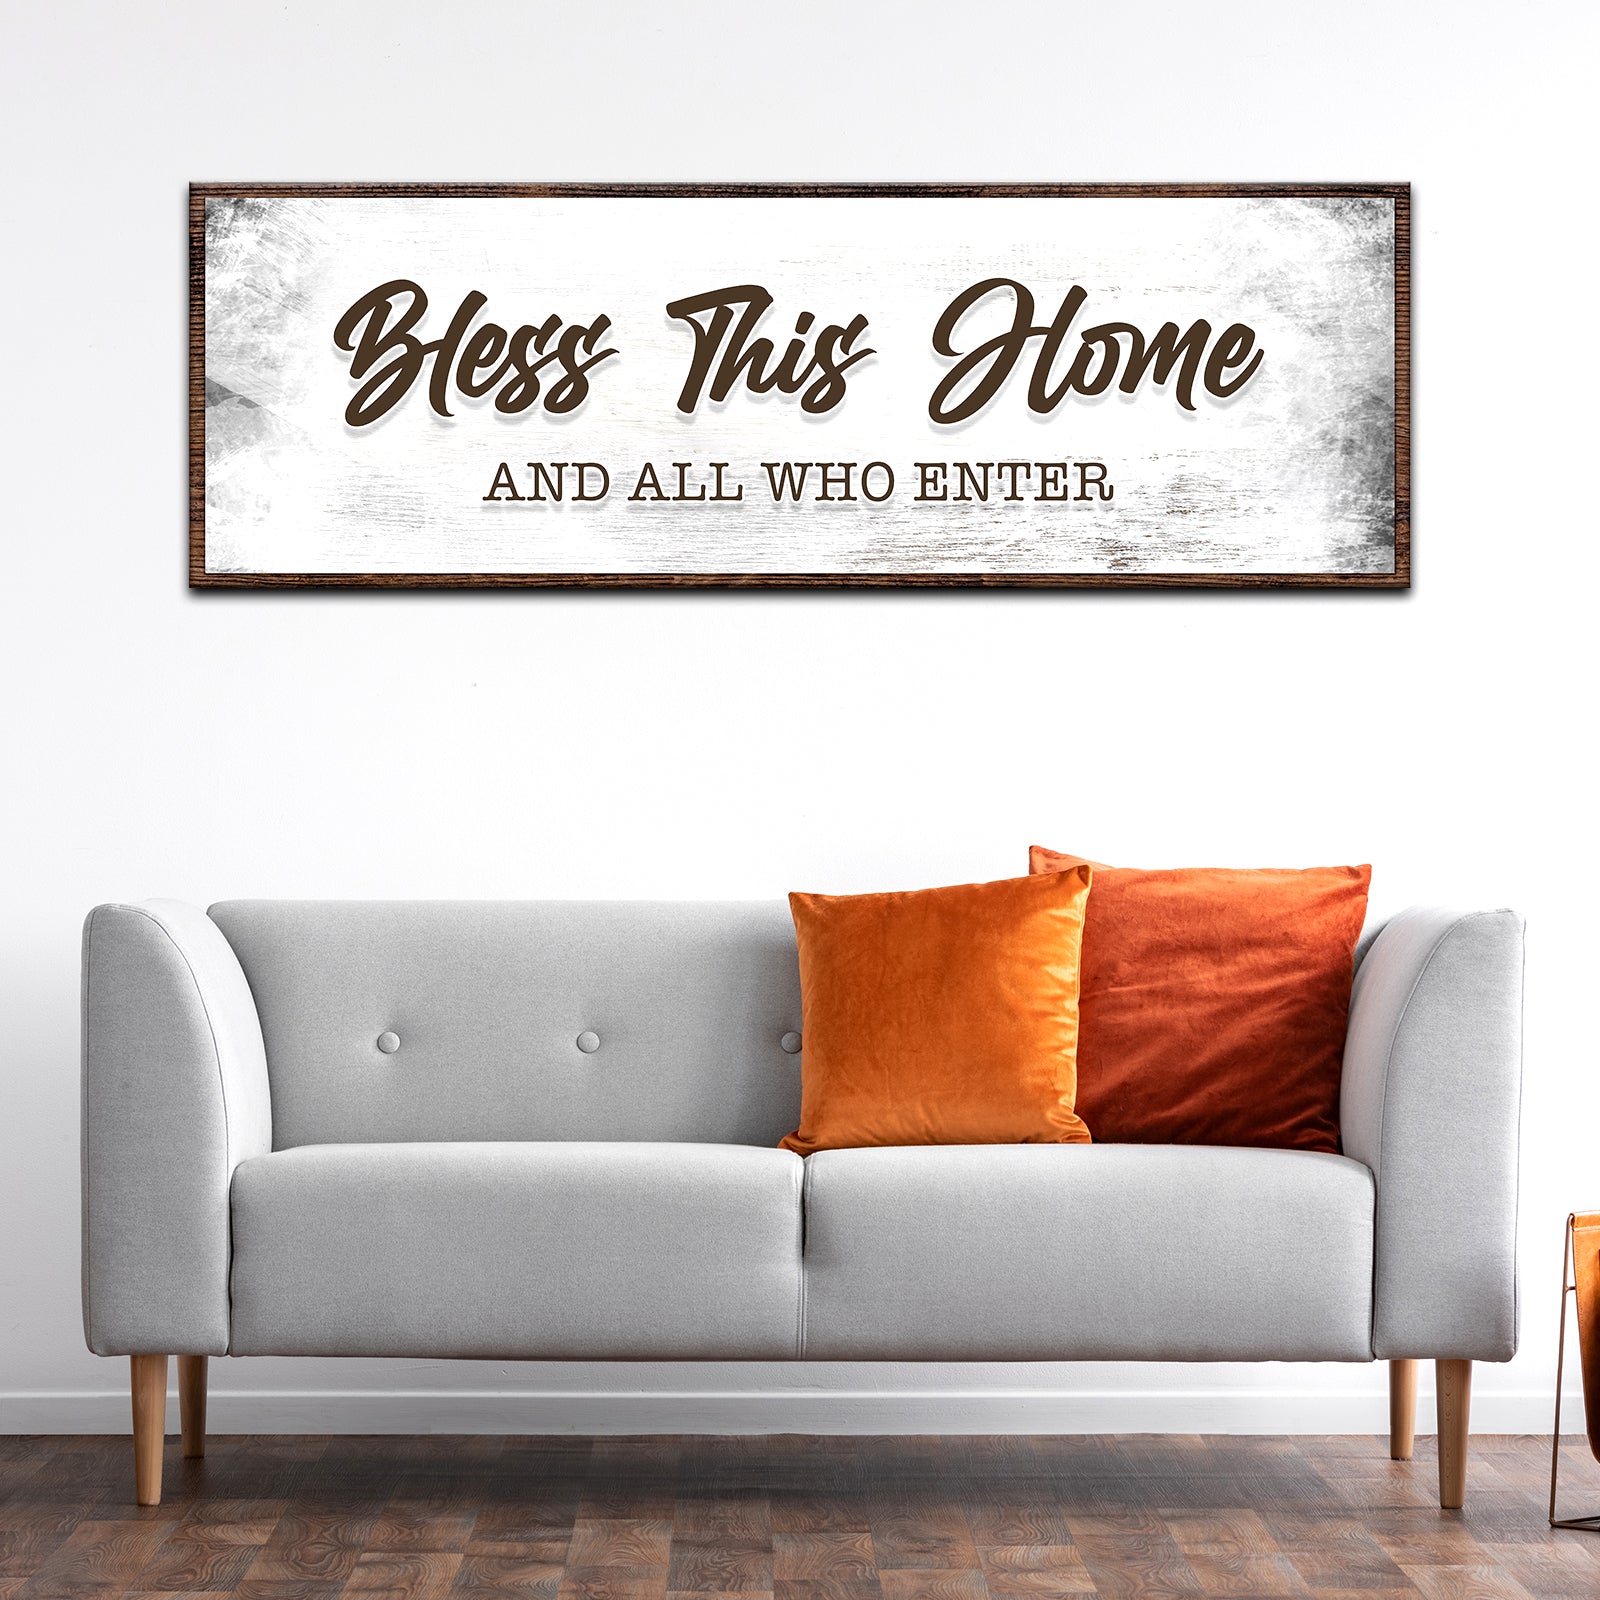 Bless This Home and All Who Enter Sign Style 1 - Image by Tailored Canvases